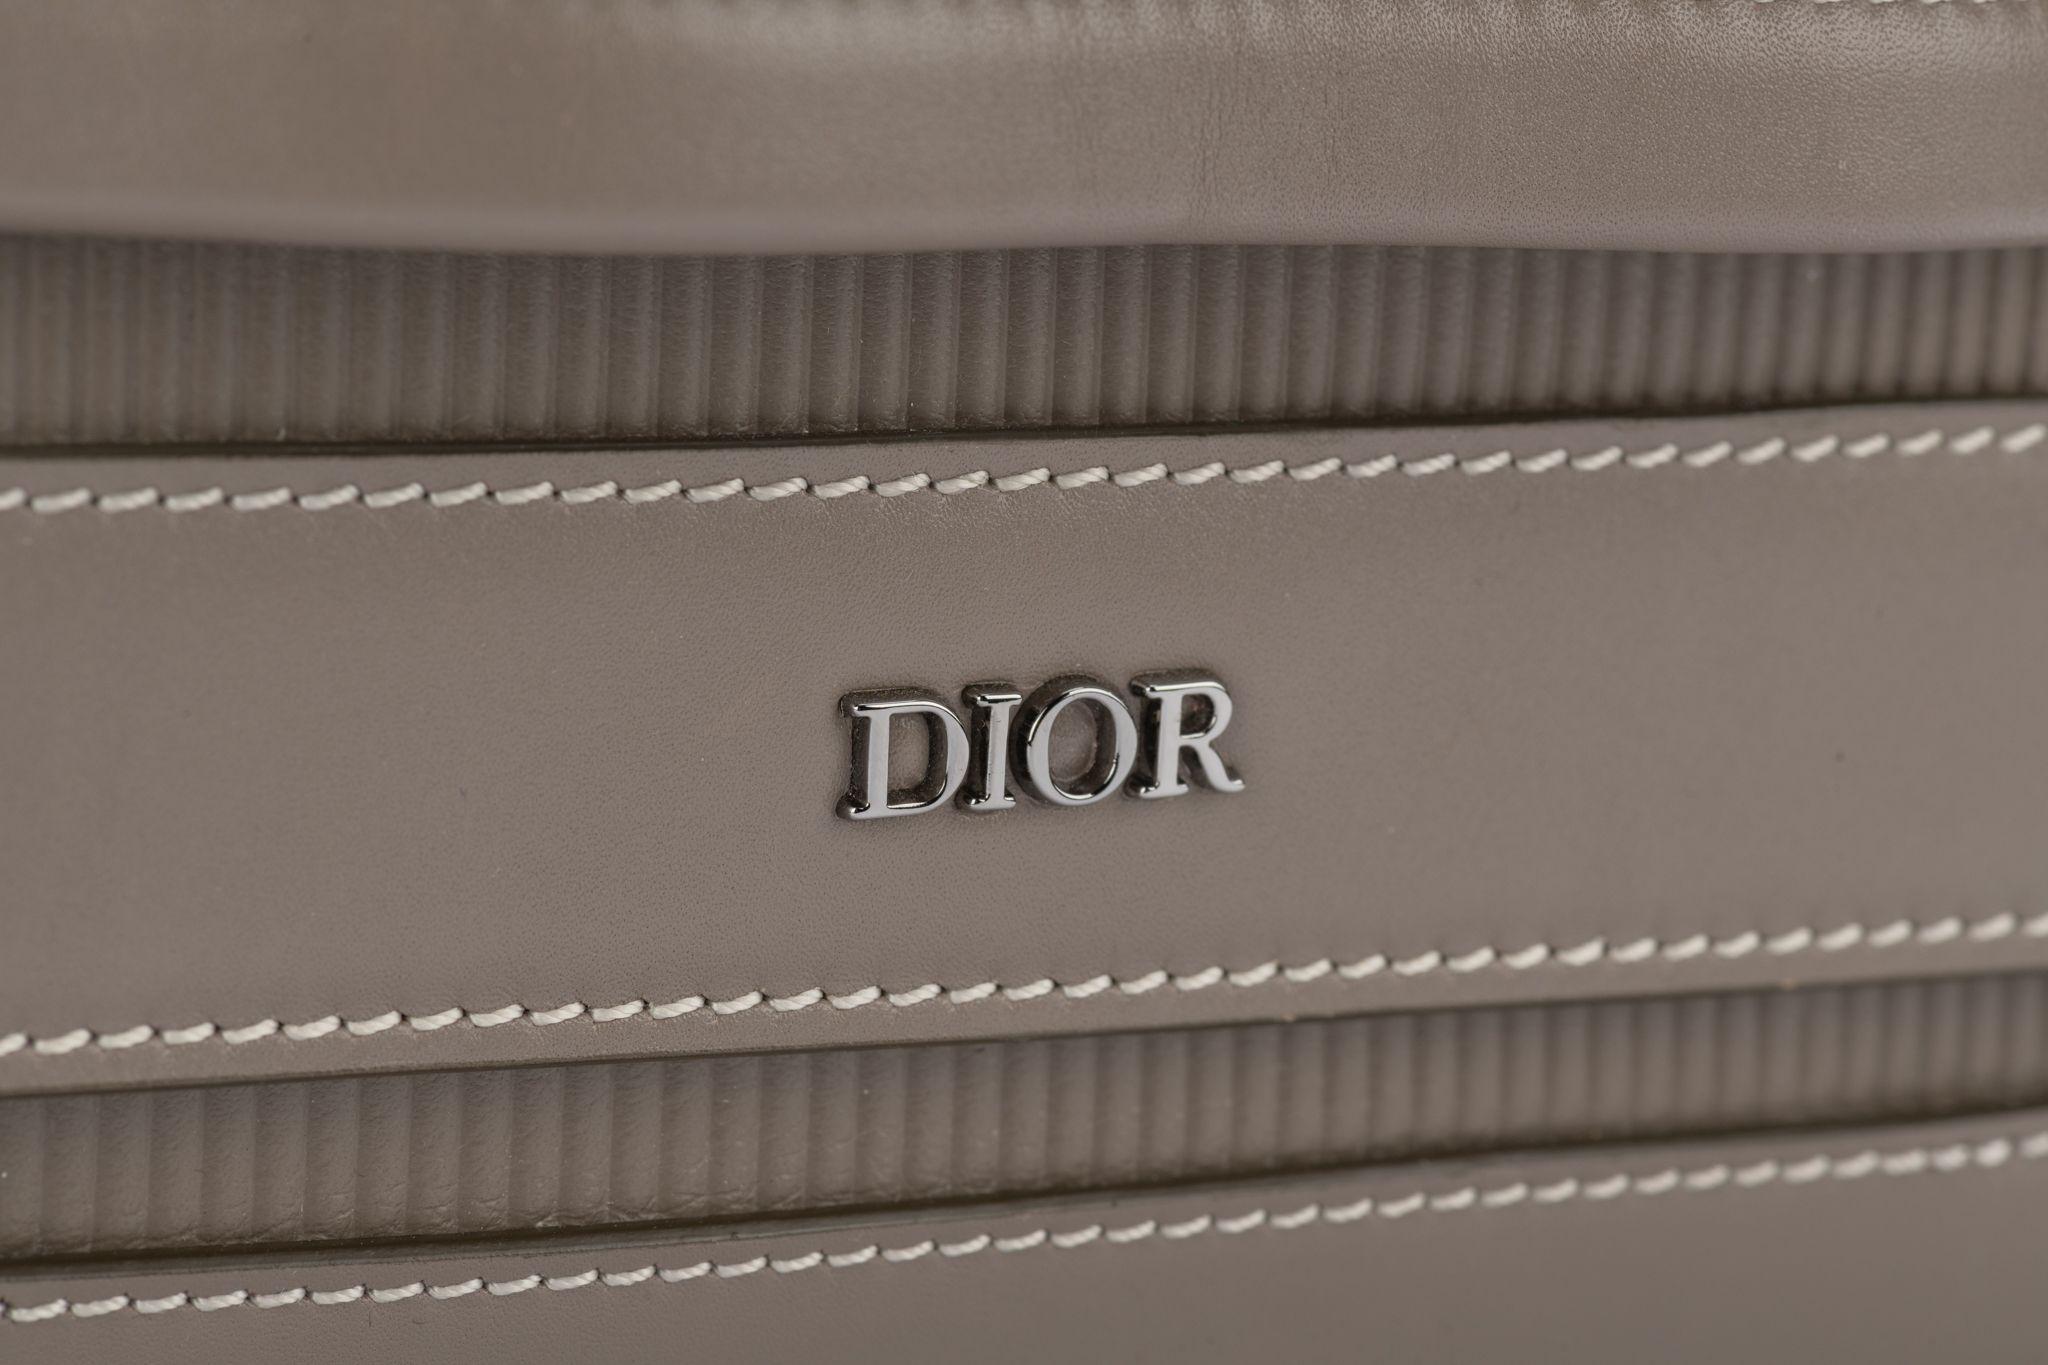 Dior New Messenger Bag in Taupe For Sale 2